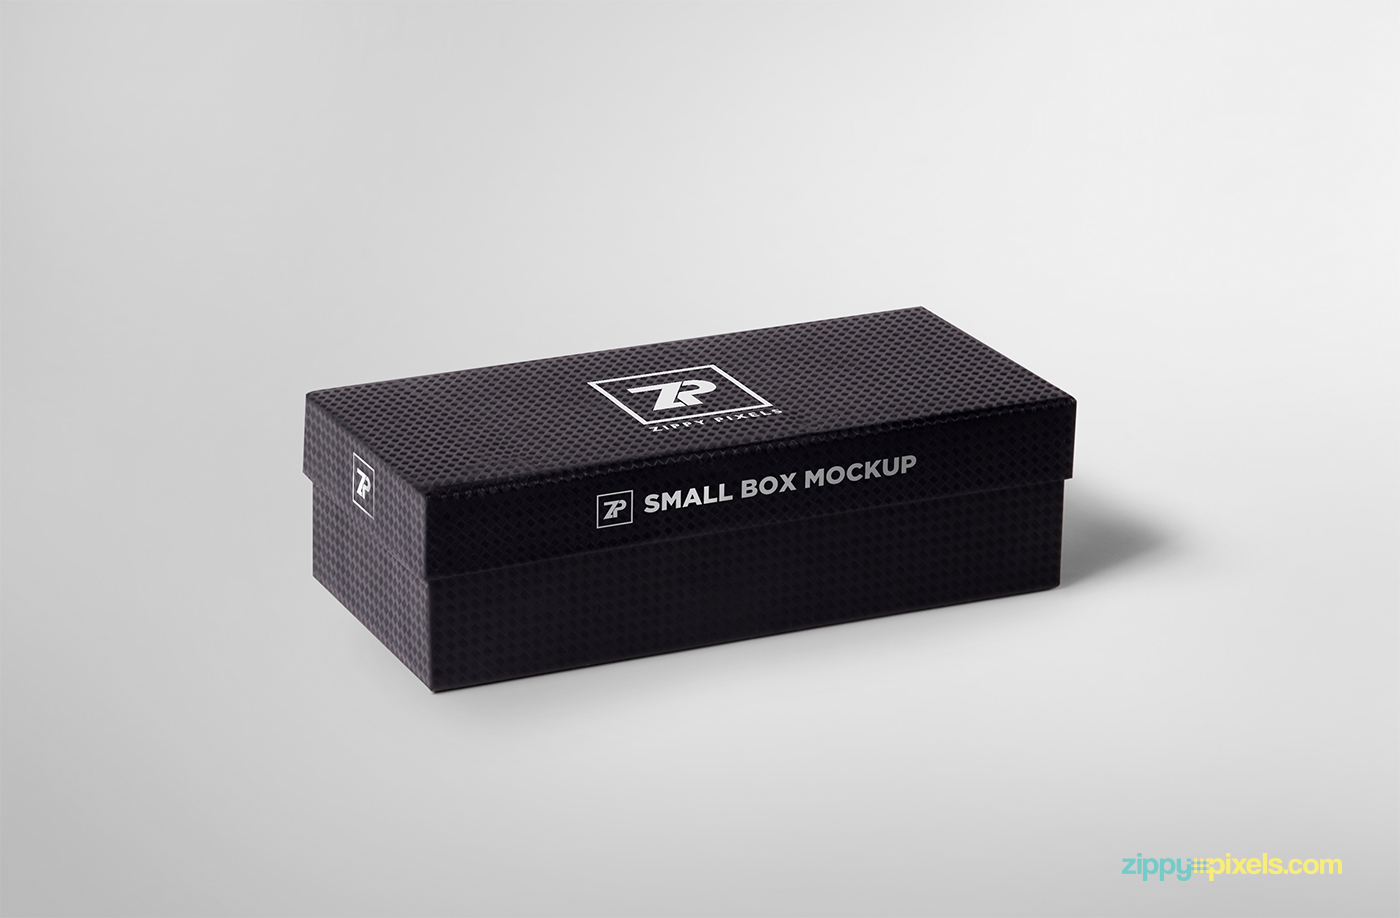 Download 2 Free Gift Box Mockups by ZippyPixels on Dribbble